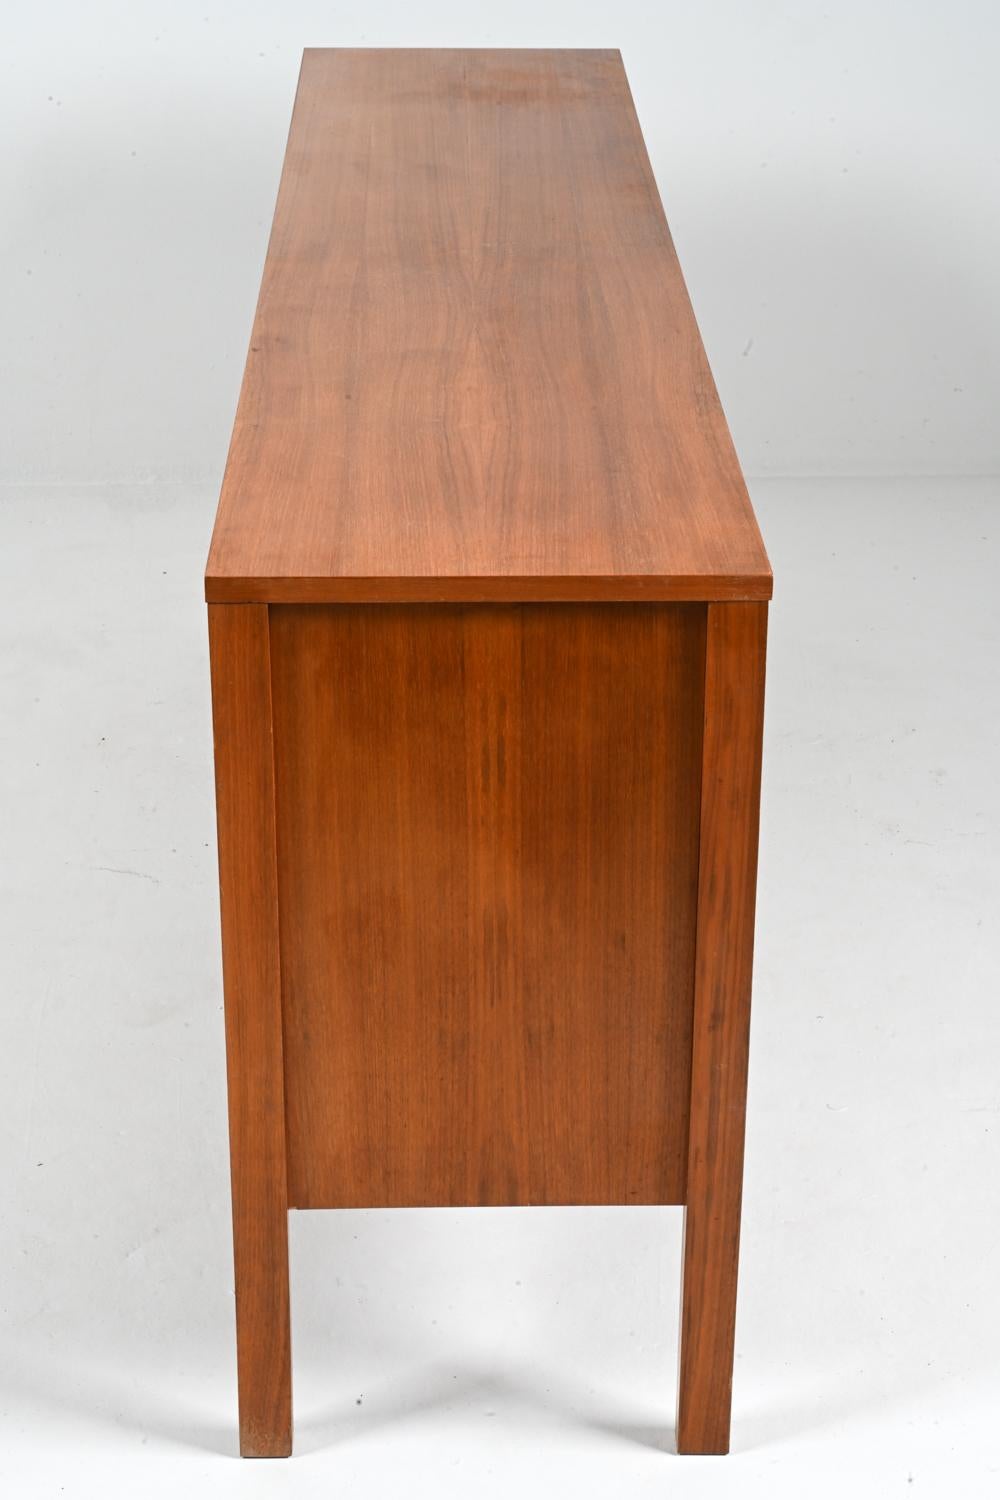 German Mid-Century Teak Woven-Front Sideboard by Leo Bub, c. 1960 For Sale 5